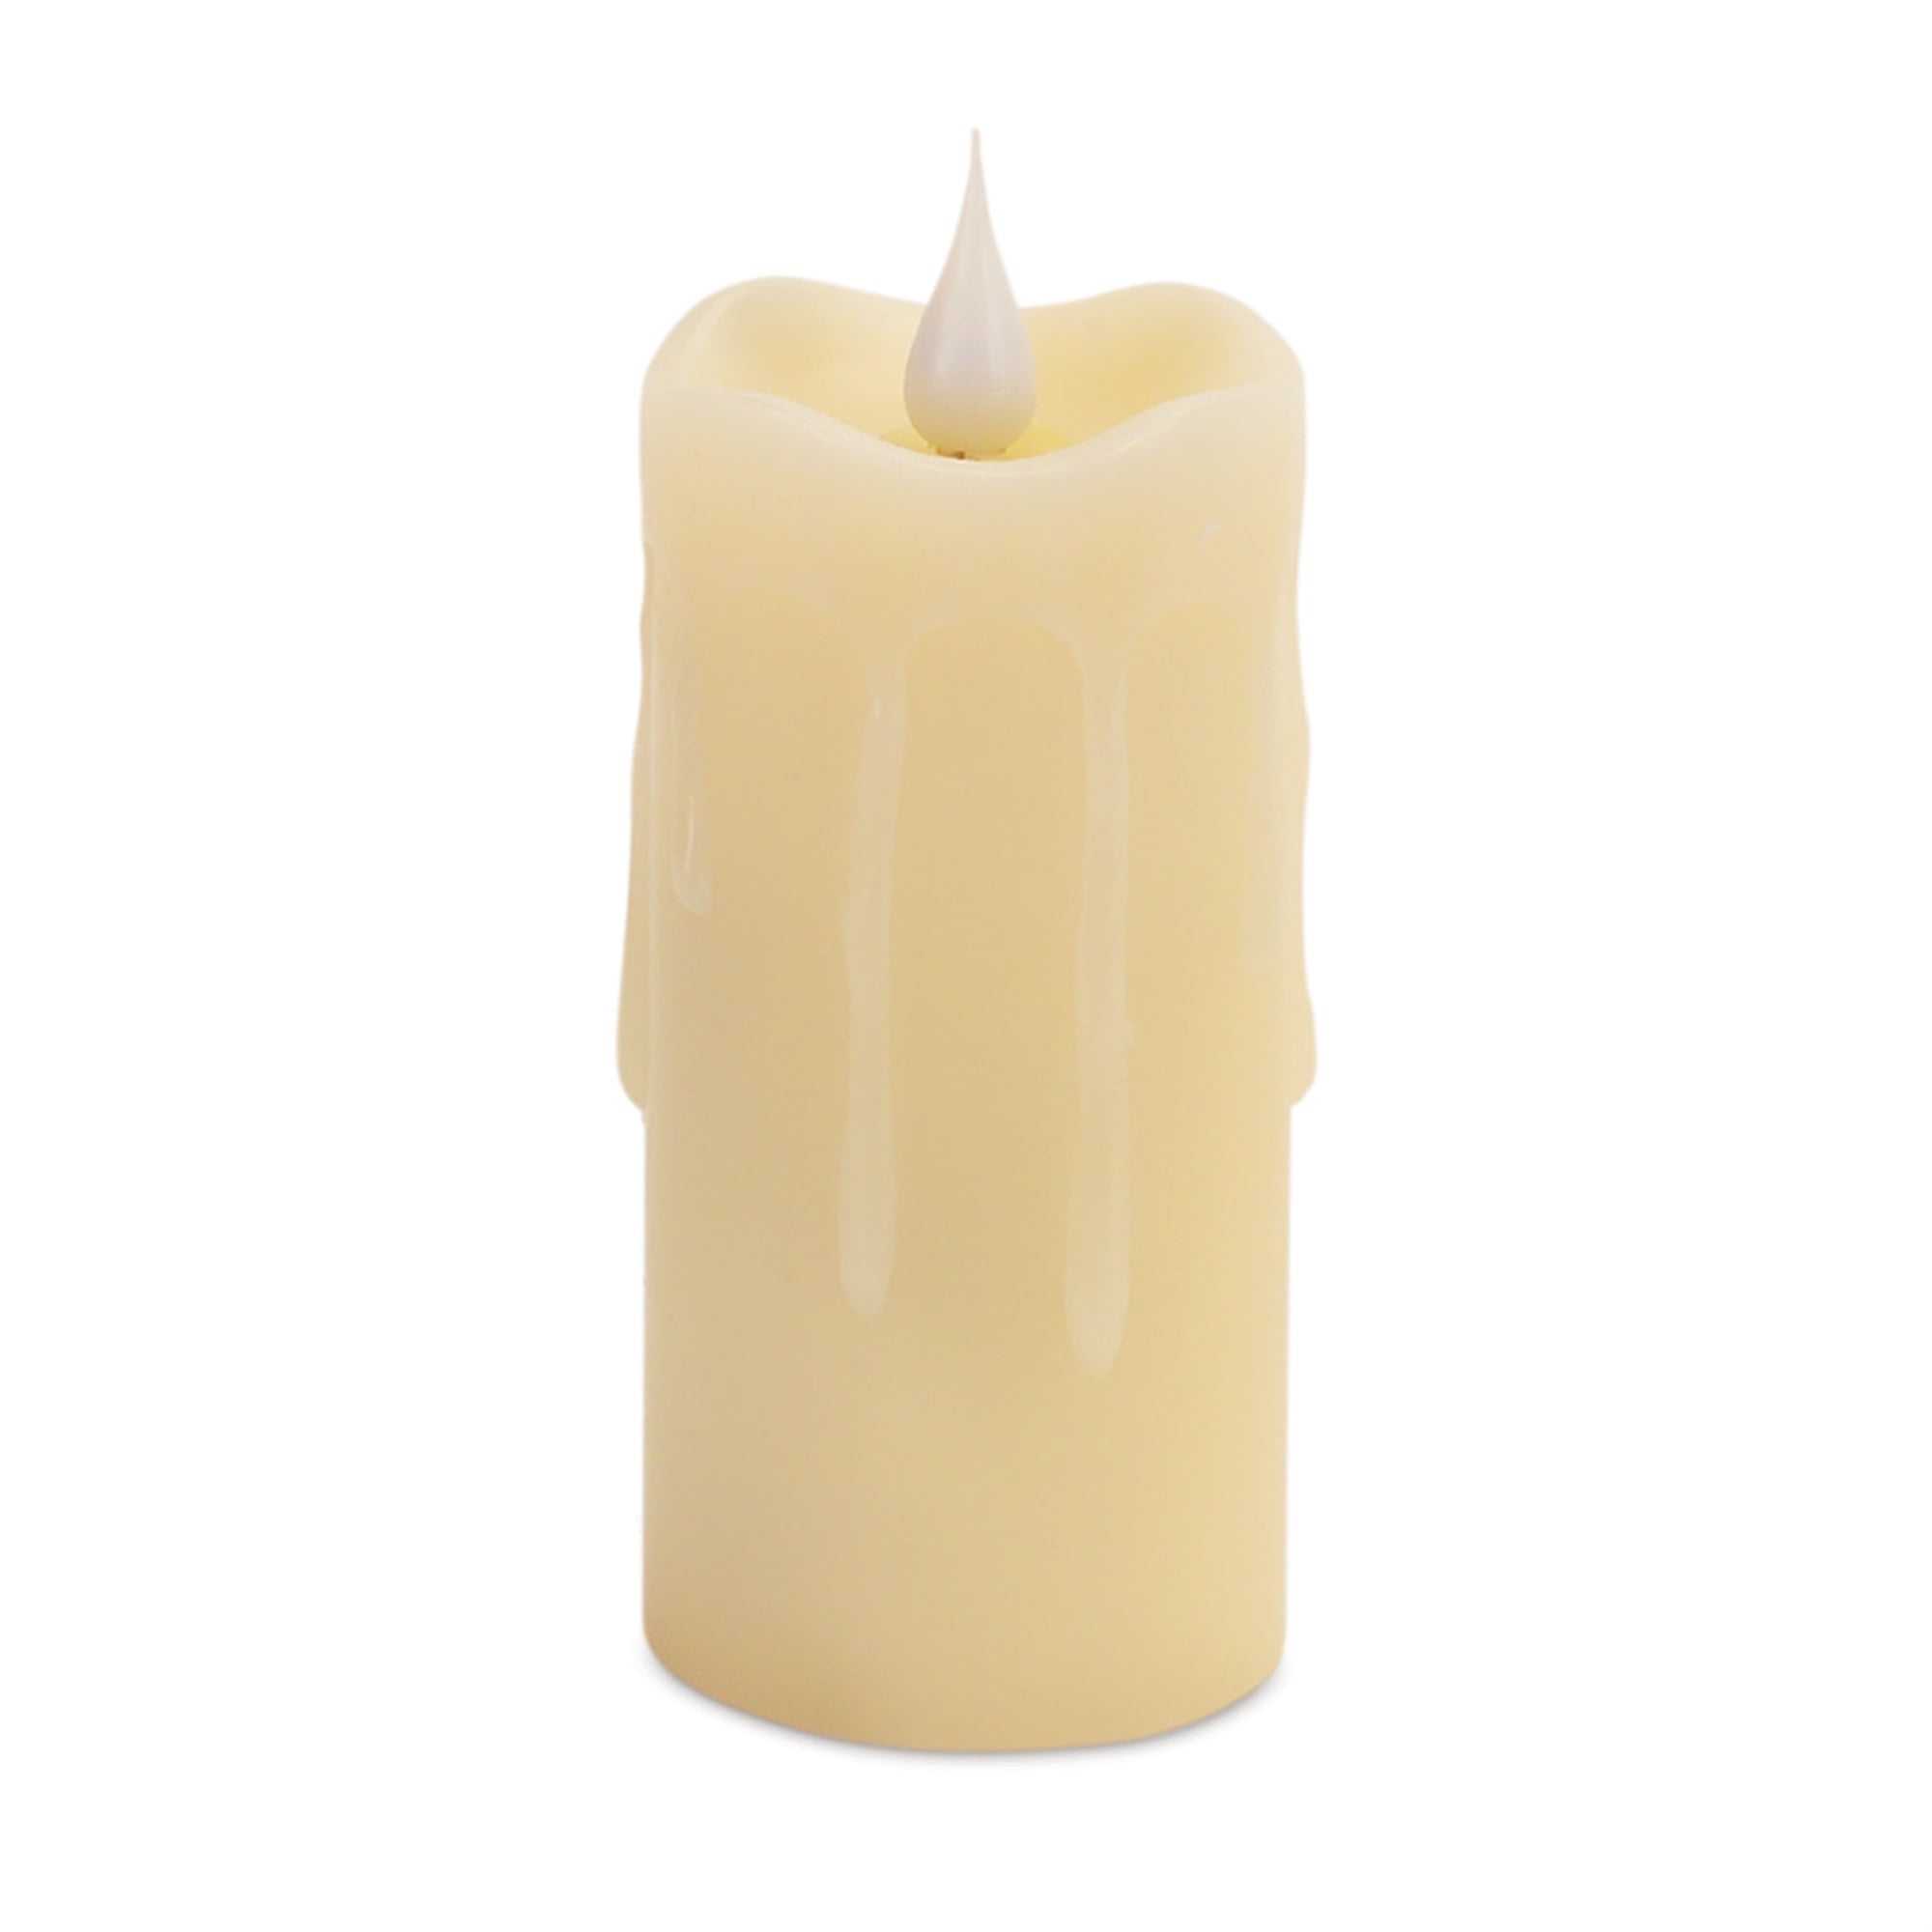 Simplux Votive w/Moving Flame (Set of 2) 2"Dx4"H